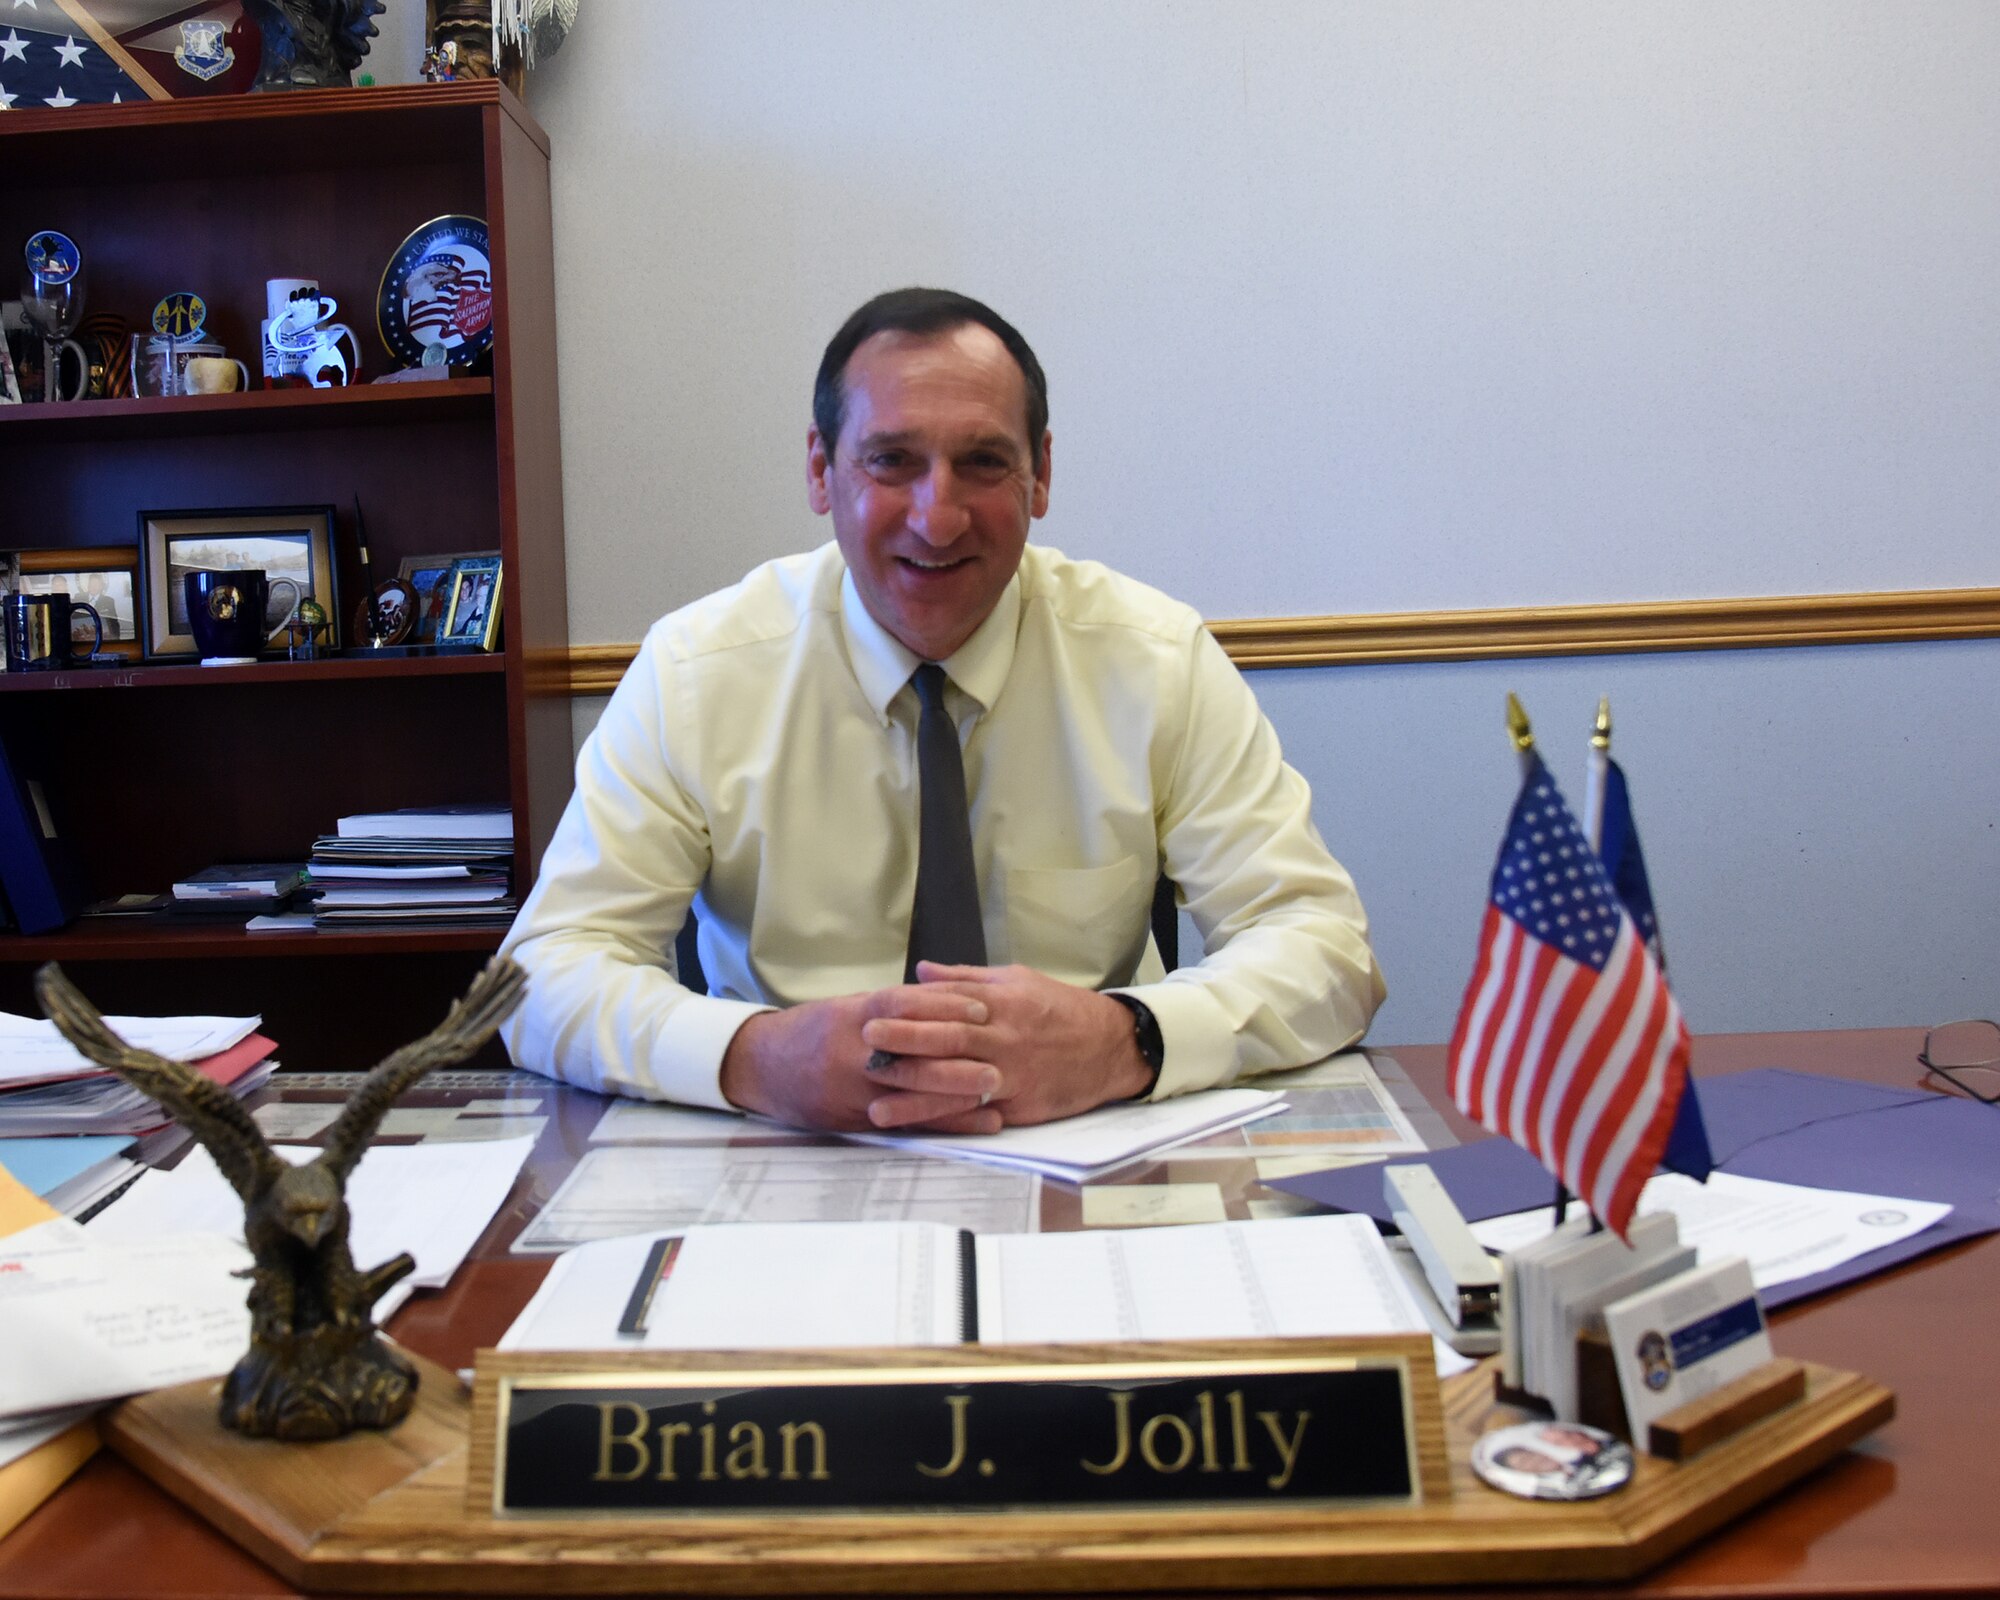 Brian Jolly, 341st Force Support Squadron manpower and personnel chief, poses at his desk May 8, 2017, at Malmstrom Air Force Base, Mont. Jolly retired from the Air Force as a chief after serving 29 years, and now uses those same leadership techniques to lead military and civilian personnel. (U.S. Air Force photo/Senior Airman Jaeda Tookes)